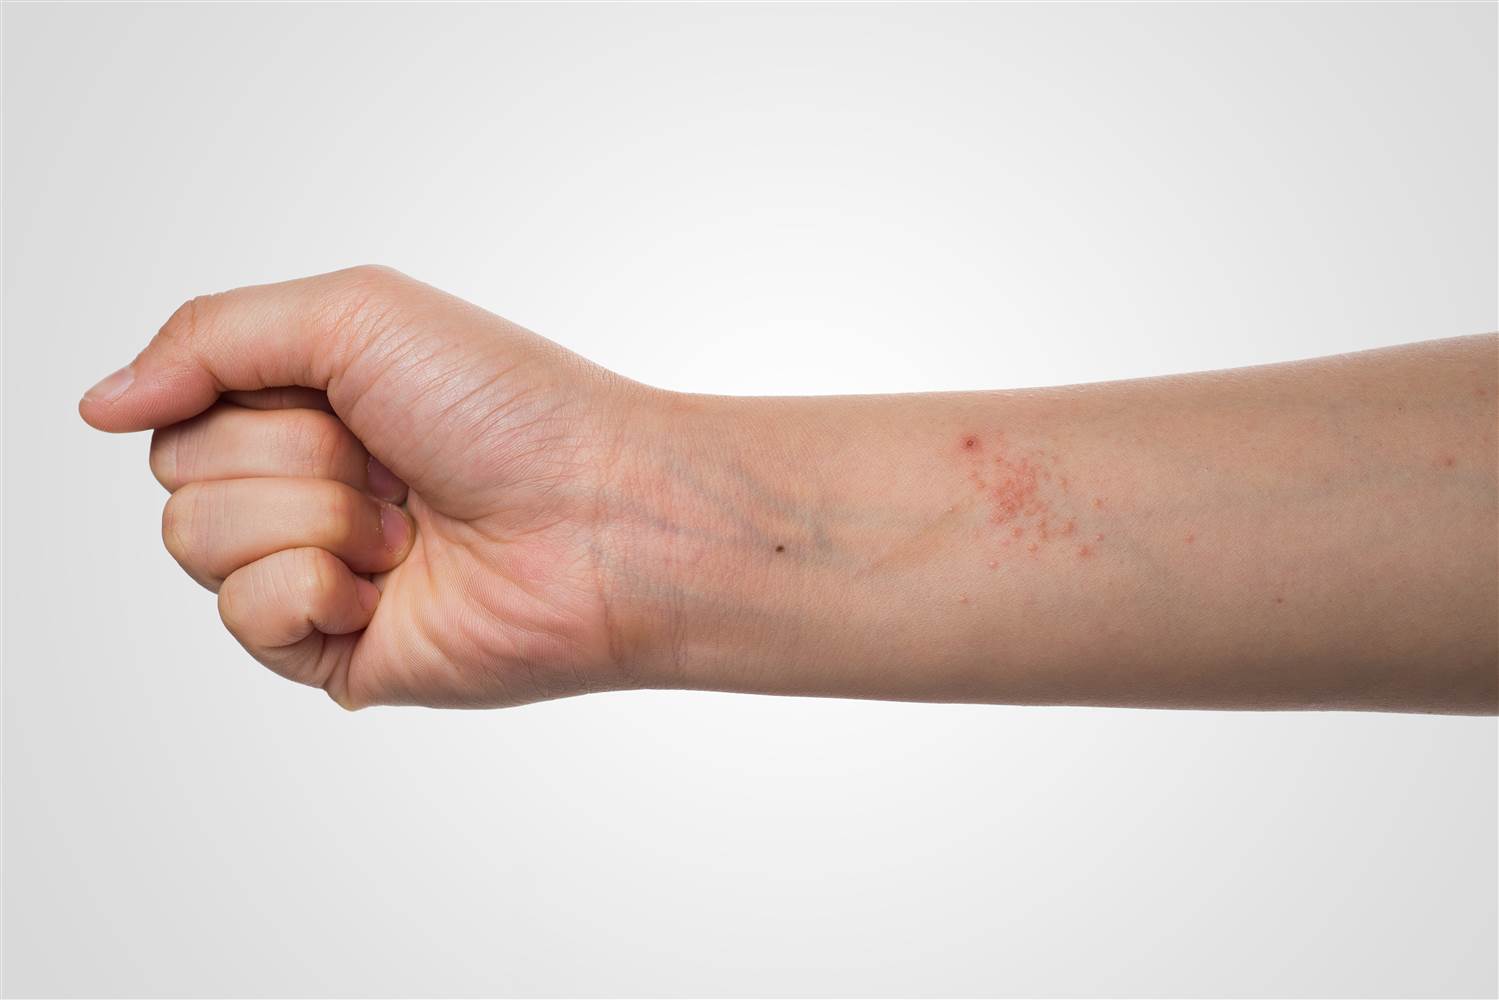 natural remedies for eczema